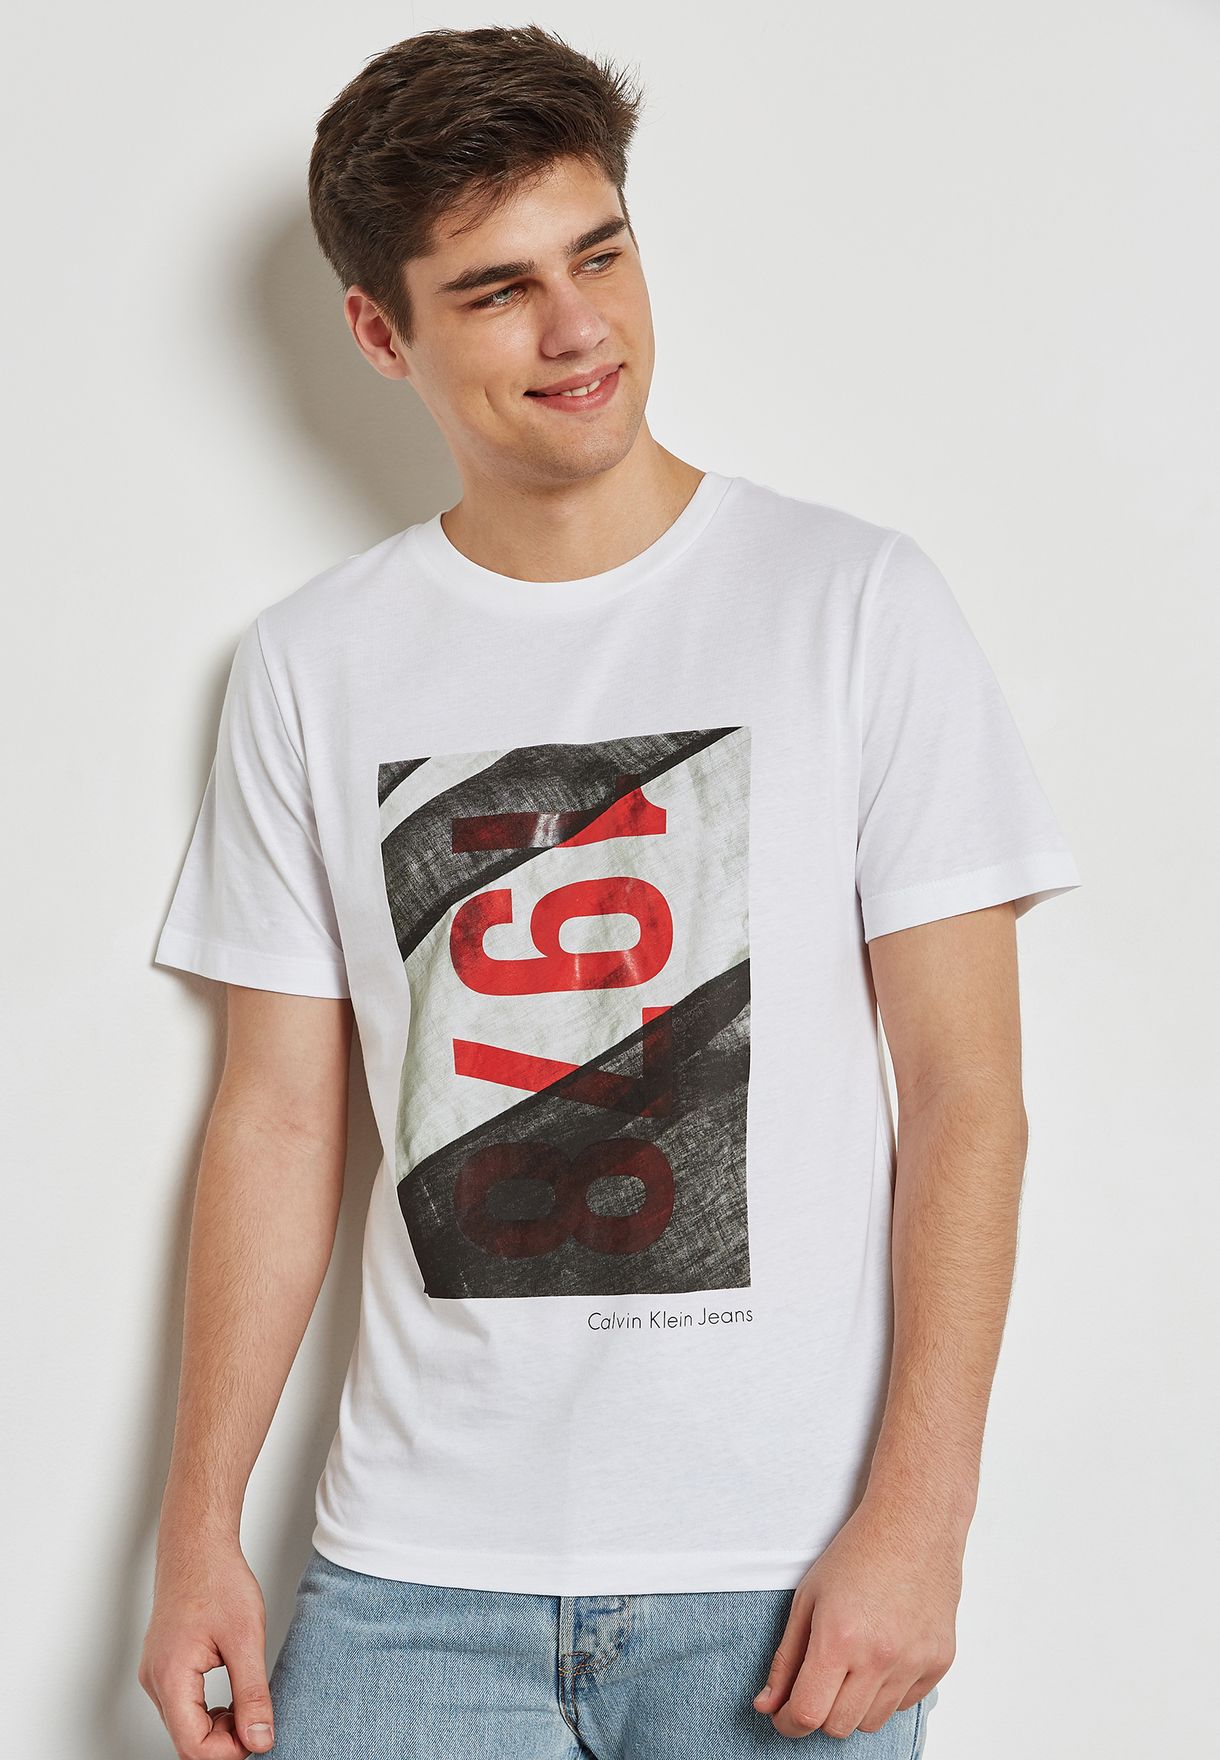 Buy Calvin Klein 1978 T Shirt | UP TO 51% OFF